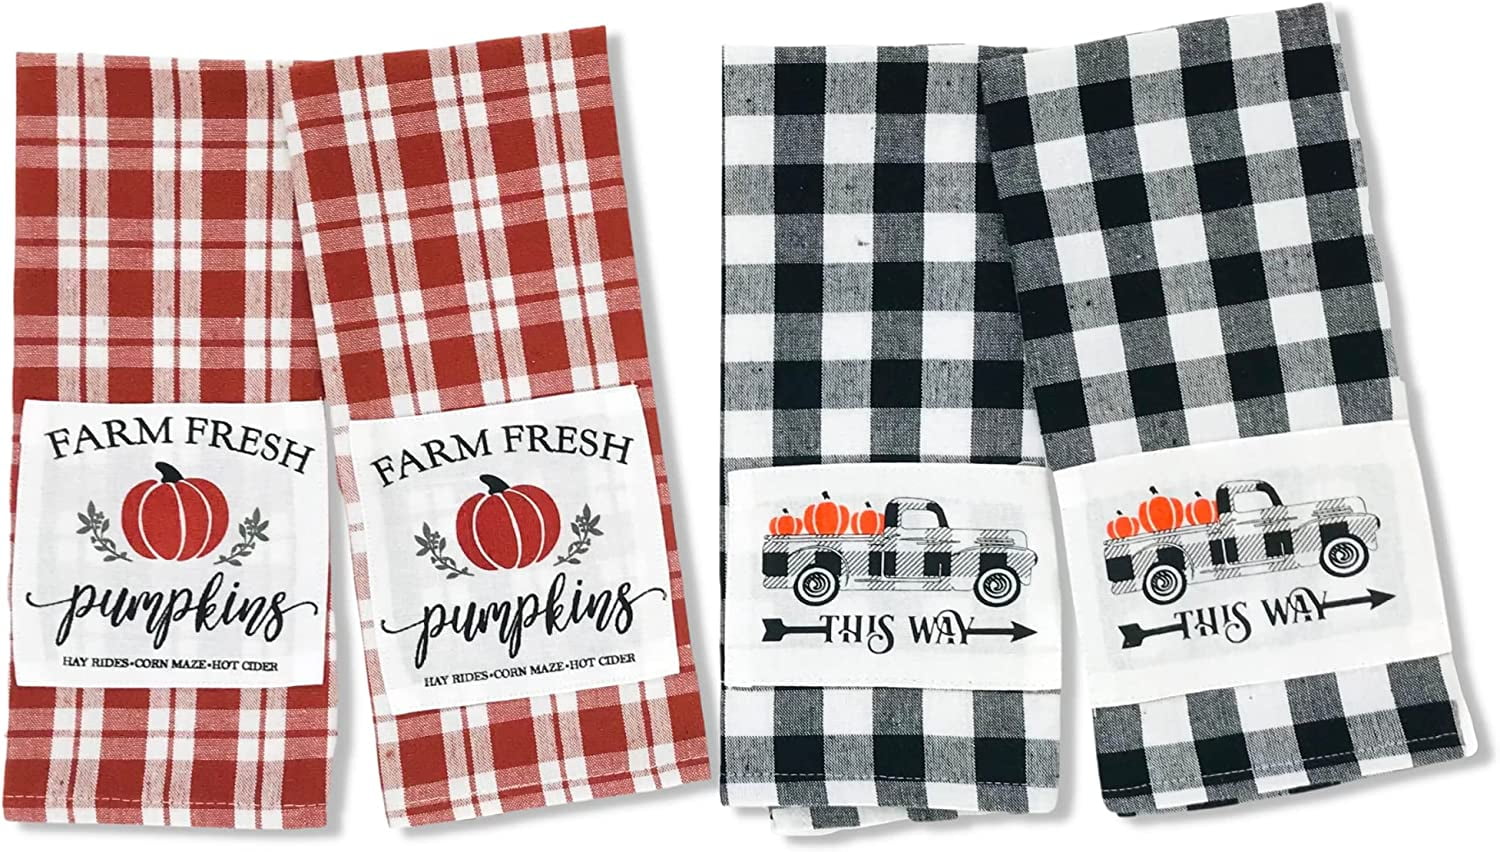 2 Checkered Hand Towel Black and White Kitchen Towels Cat Themed Dishtowel  Plaid